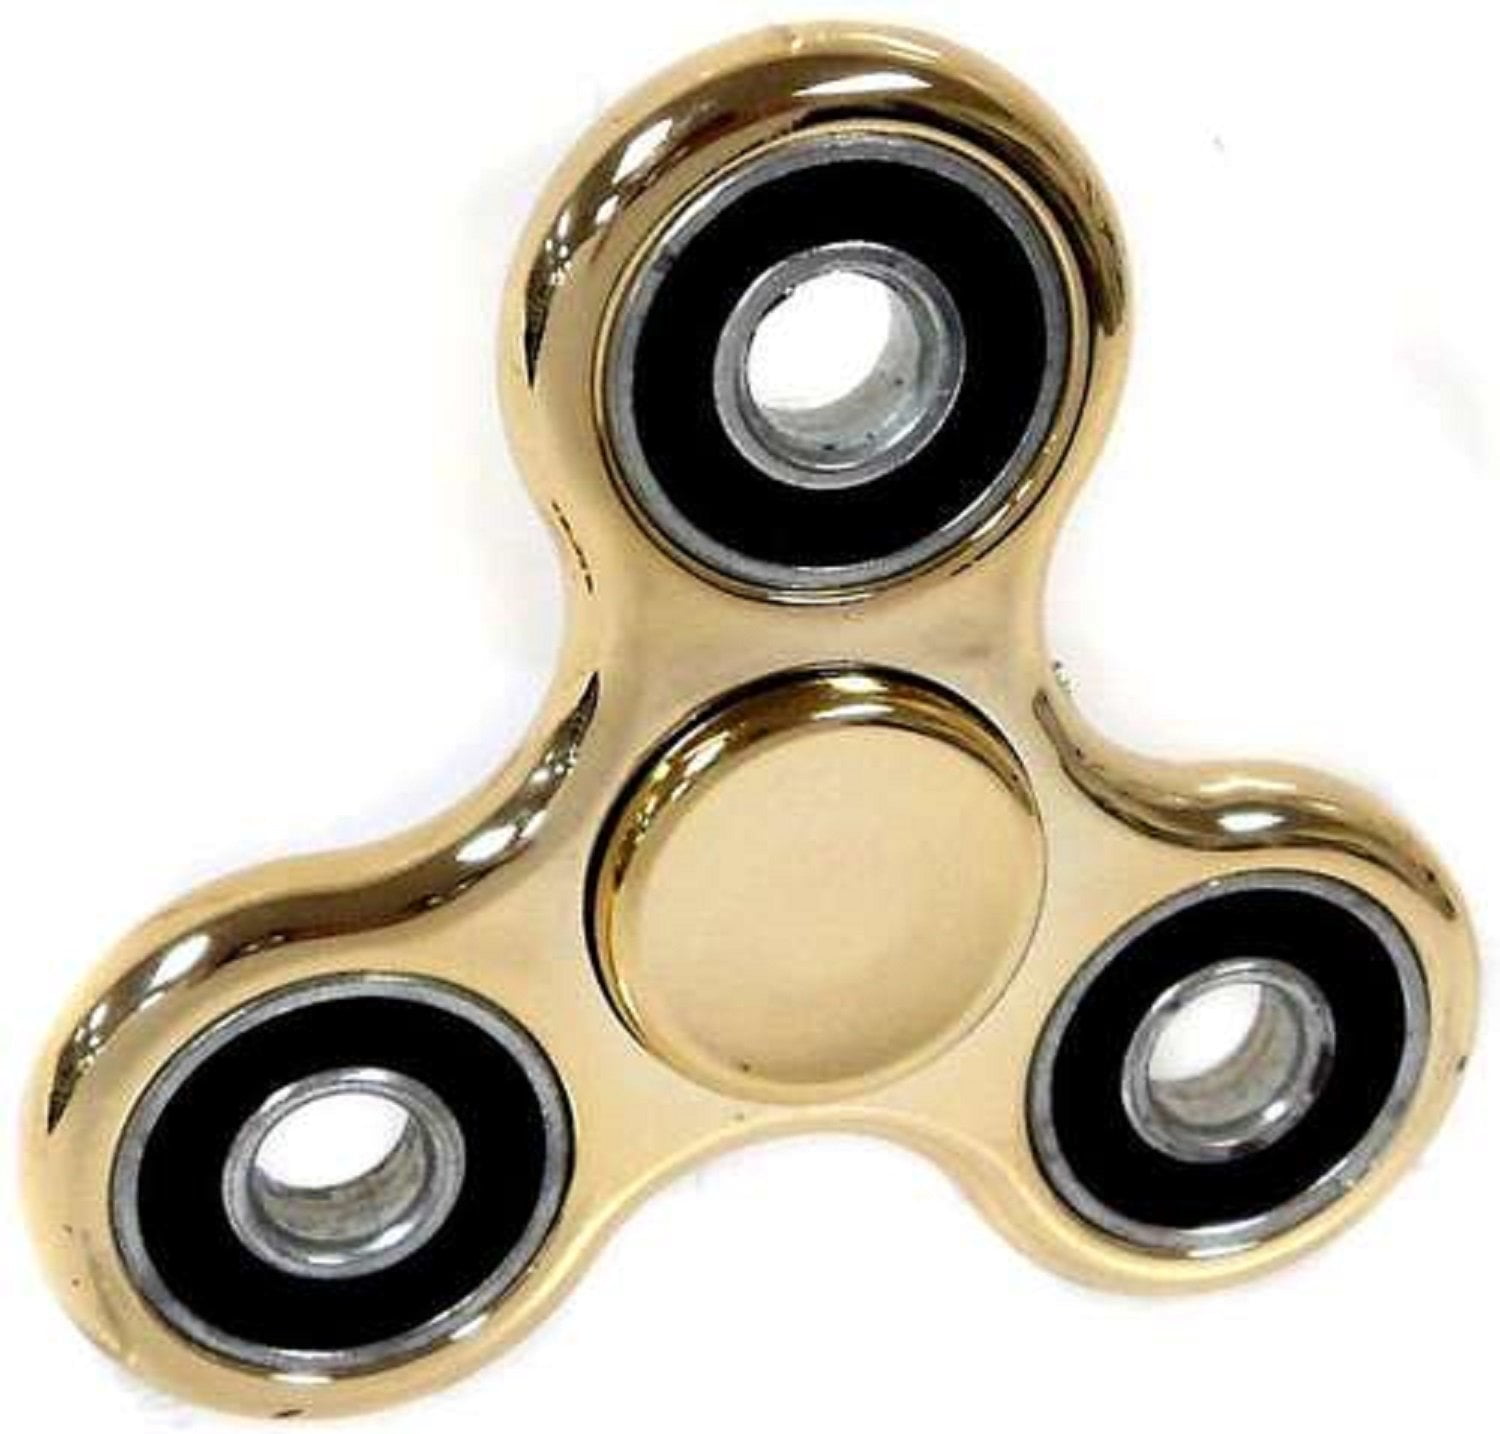 PENNY/COIN GOLD Fidget Metal Hand Spinner Stress Anxiety Relief Toys Tri Spins 3 